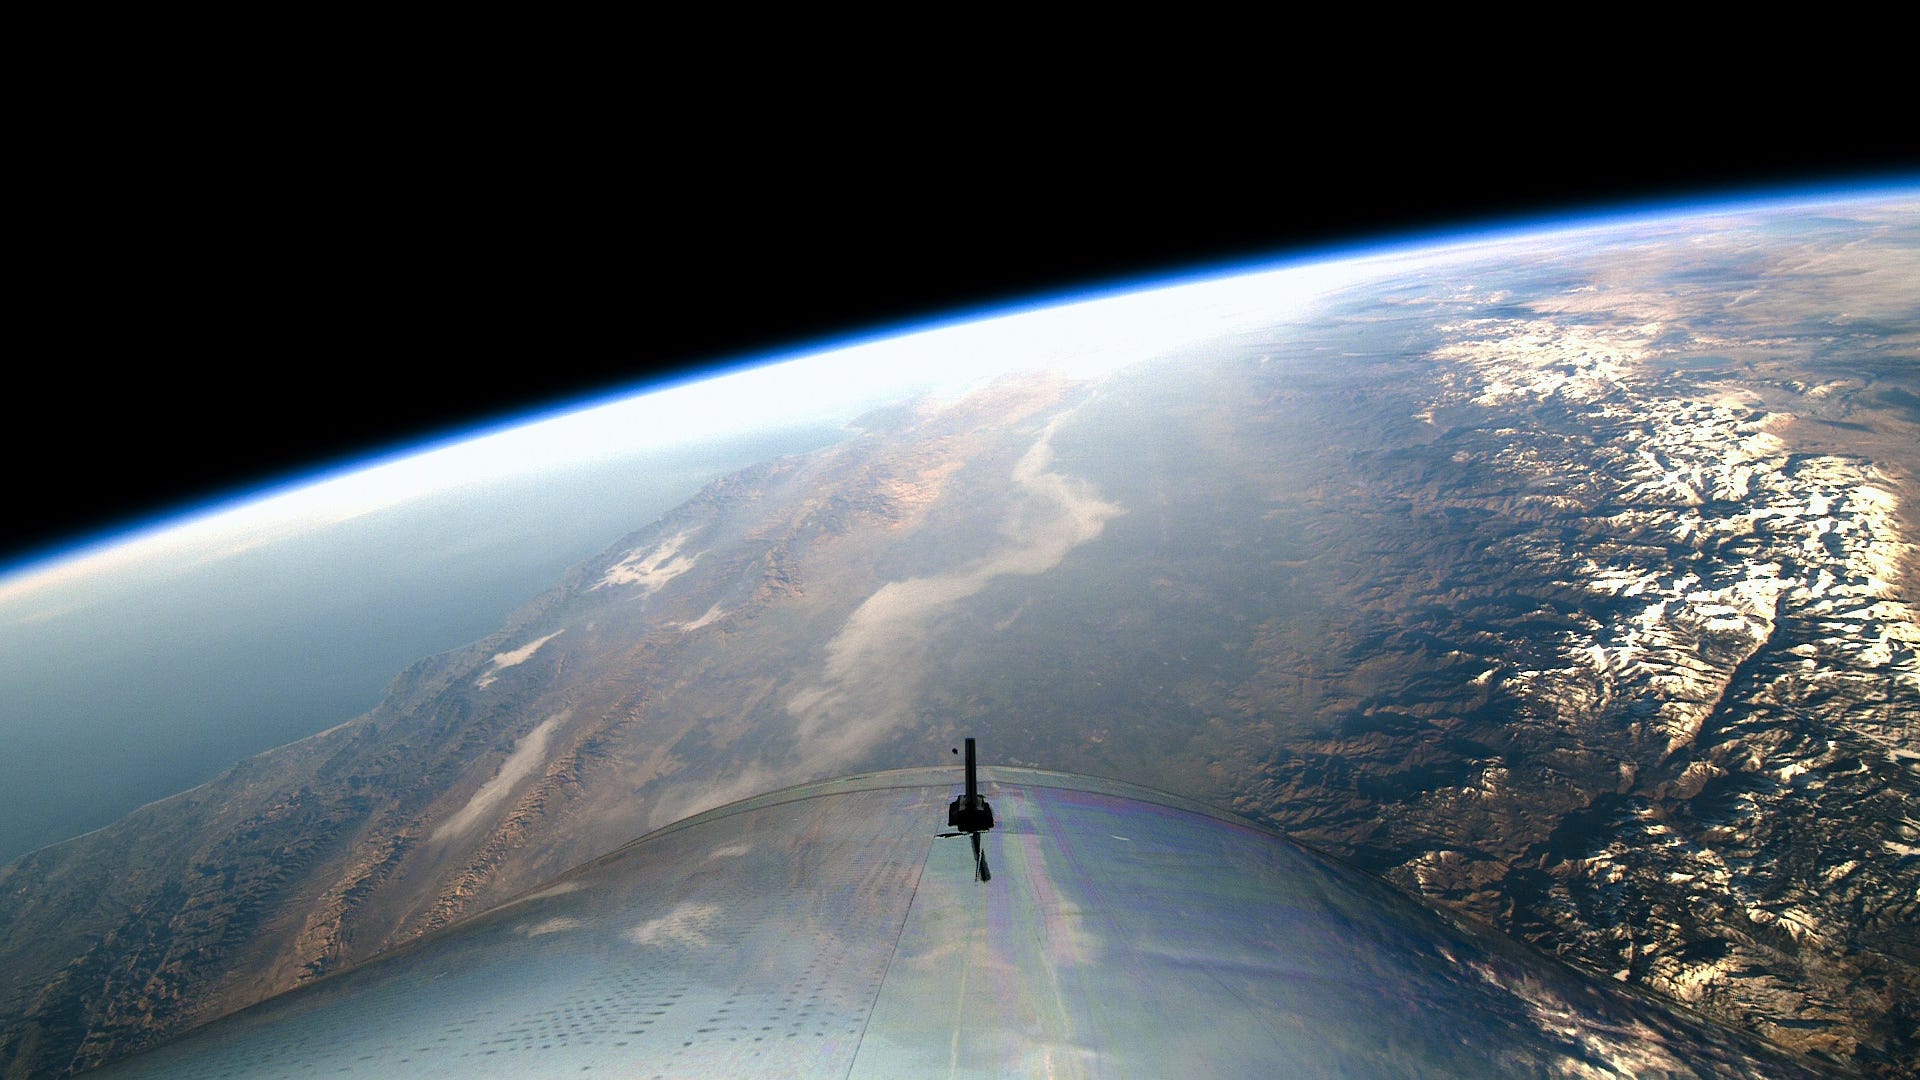 view from space show earth curvature below vss unity space plane body